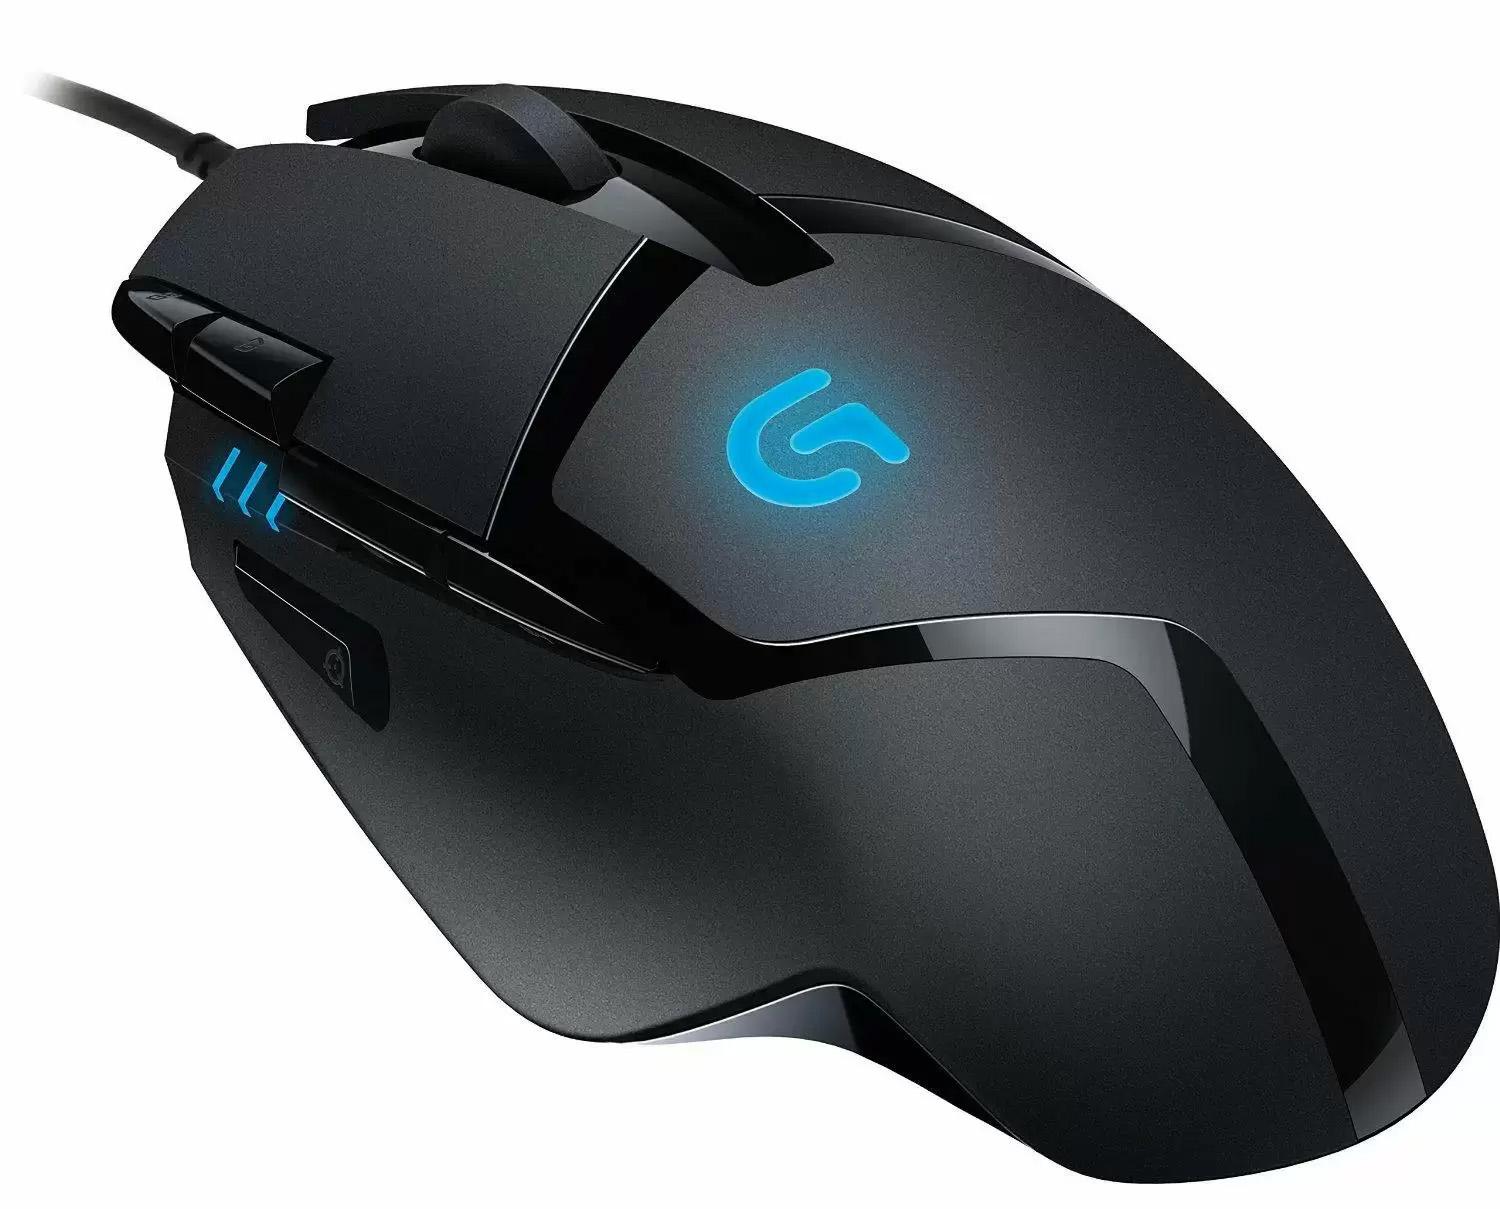 Logitech G402 Hyperion Fury Gaming Mouse for $21.49